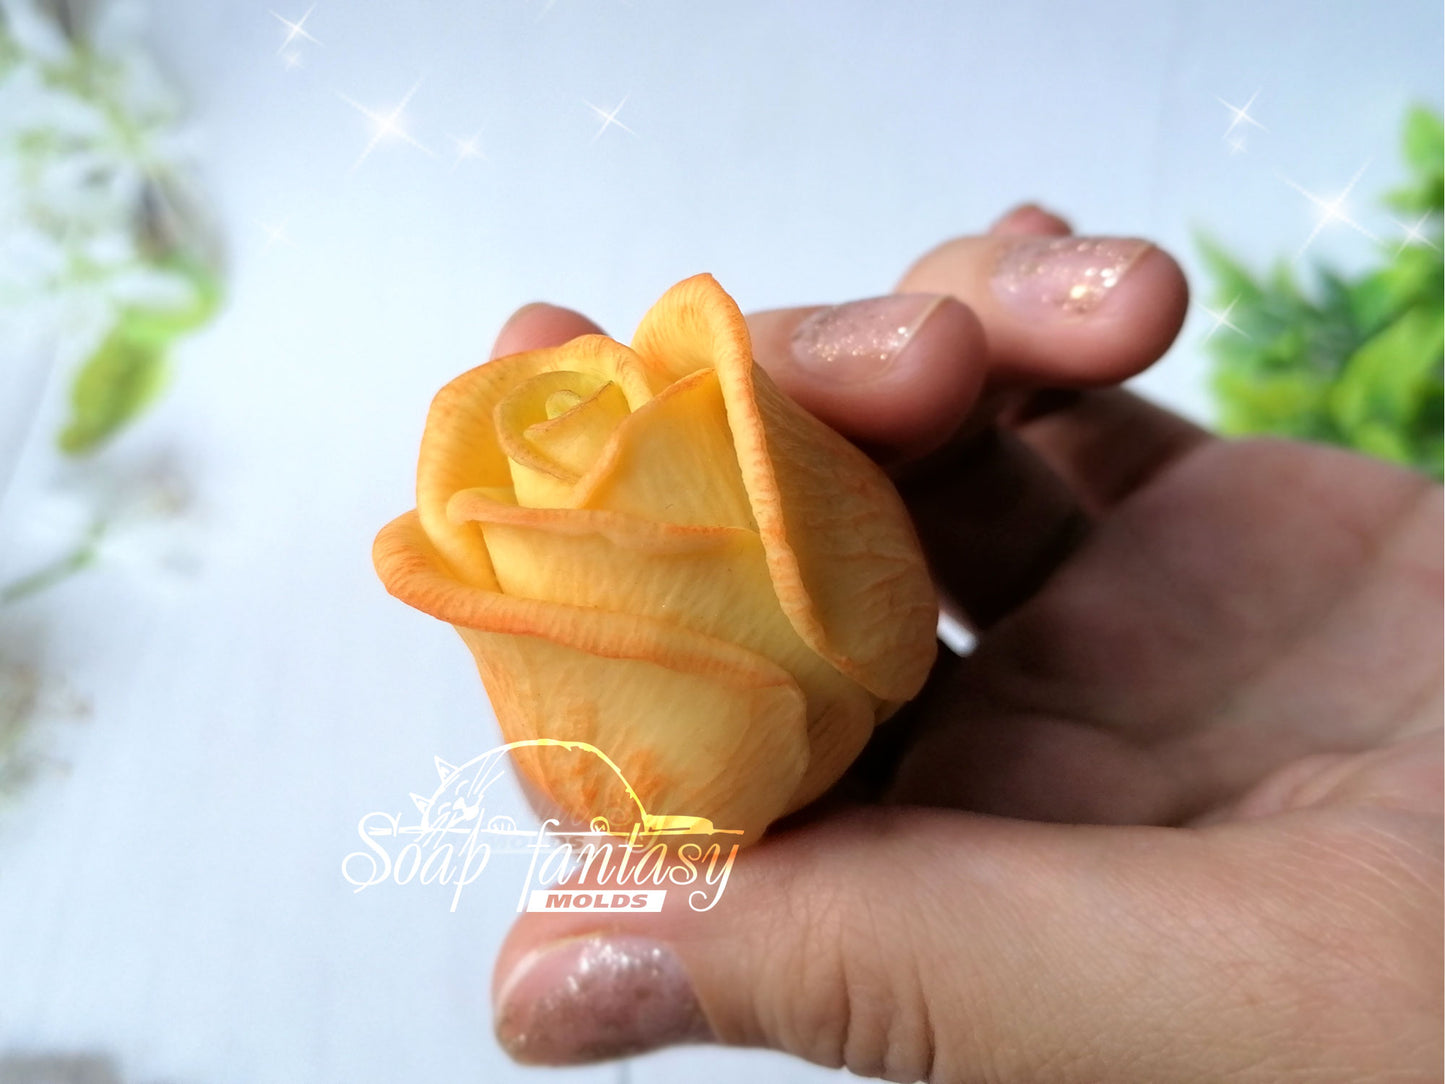 Small rosebud "Symphony" silicone mold for soap making